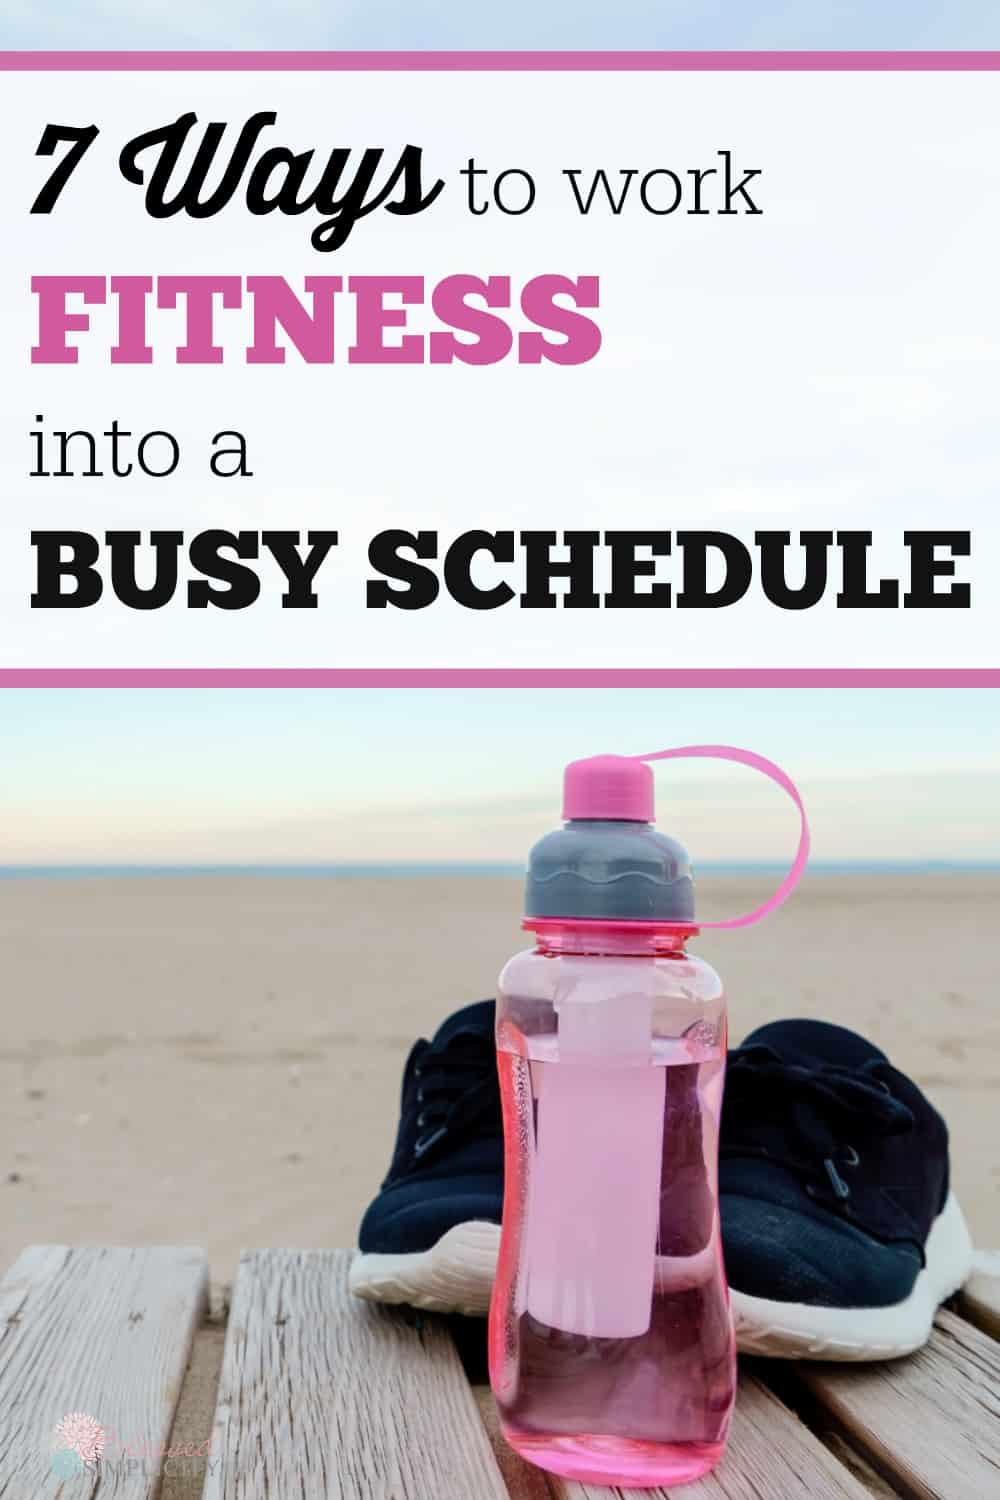 Finding time for fitness is difficult for busy moms. But fitness is super important self care for moms. These are great ways to work it in.